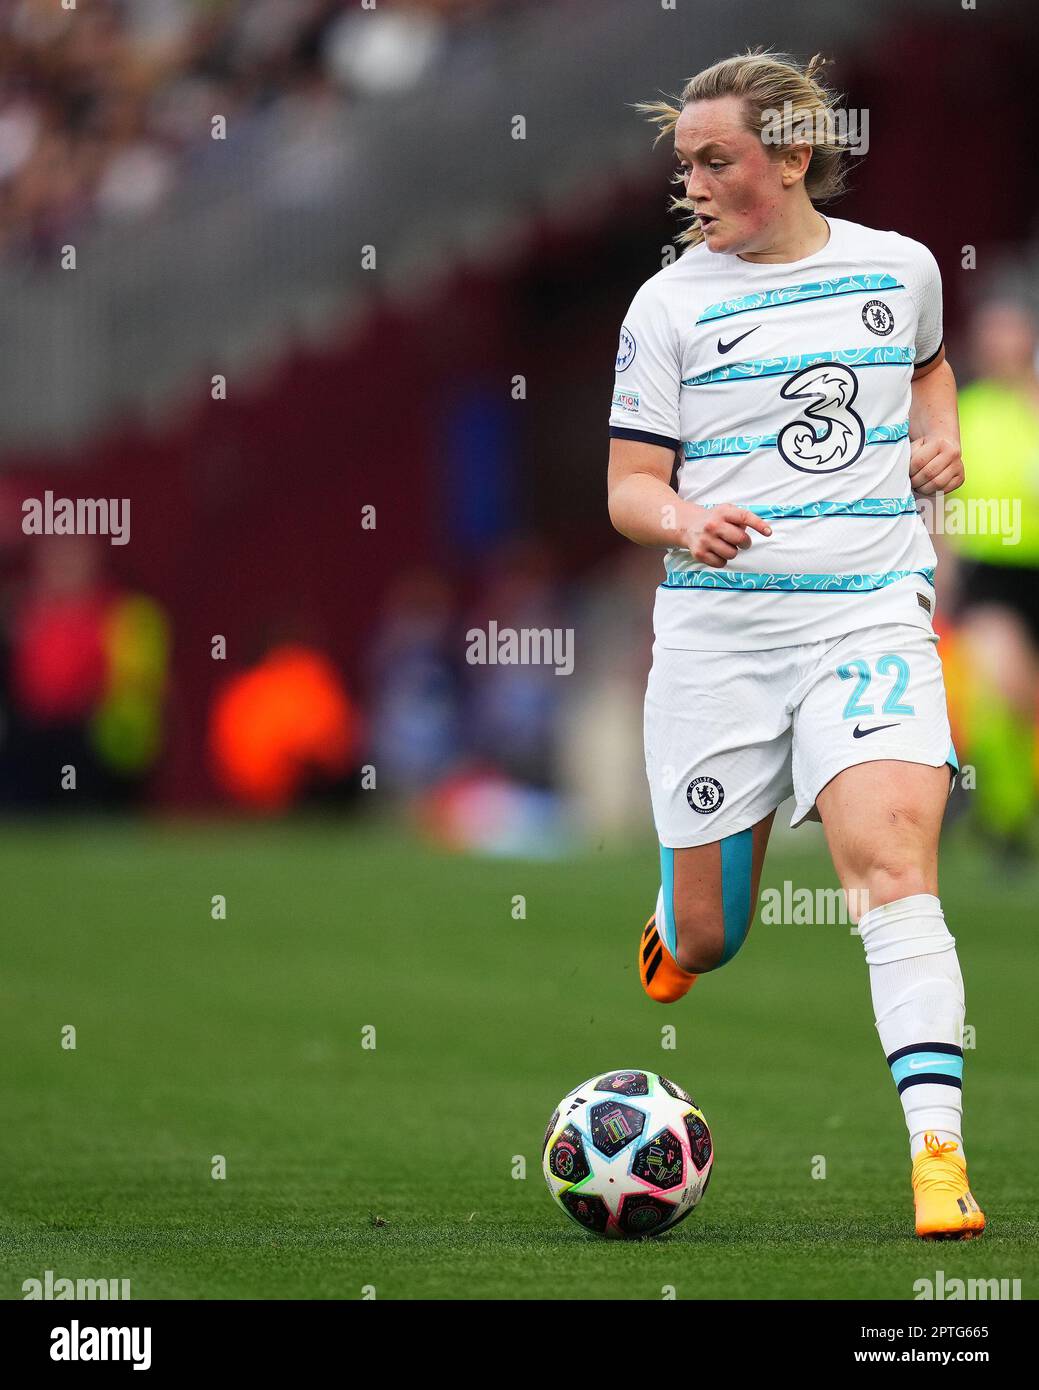 Erin Cuthbert of Chelsea FC during the UEFA Womens Champions League match, Semi-Finals, 2nd leg between FC Barcelona v Chelsea FC played at Spotify Camp Nou Stadium on April 27, 2023 in Barcelona, Spain. (Photo by Colas Buera / PRESSIN) Stock Photo